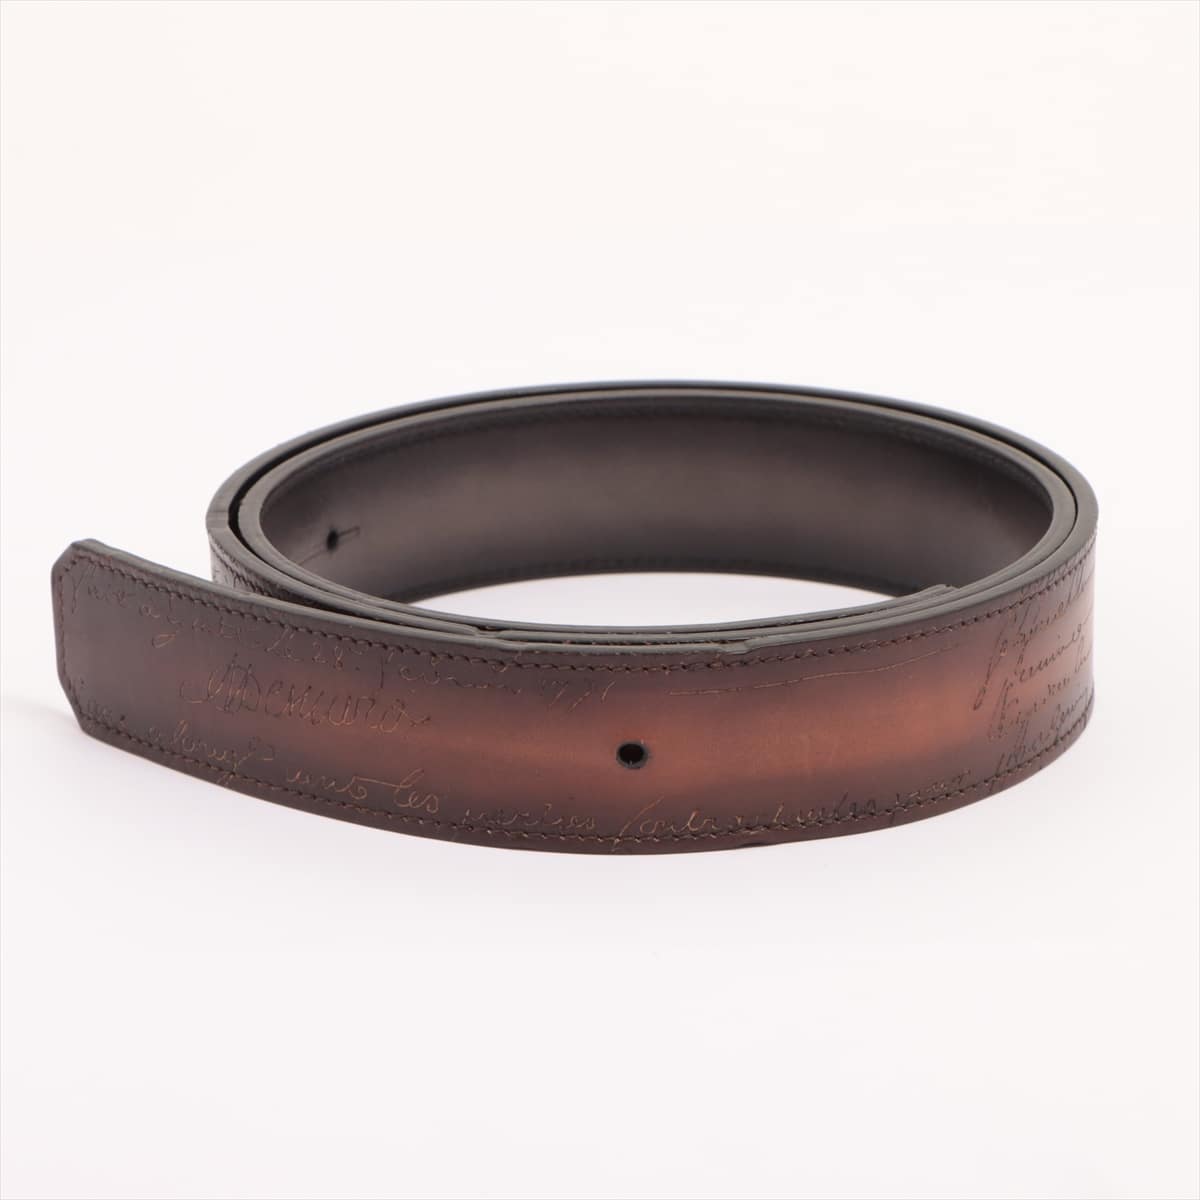 Berluti Calligraphy Belt Leather Brown For 35mm